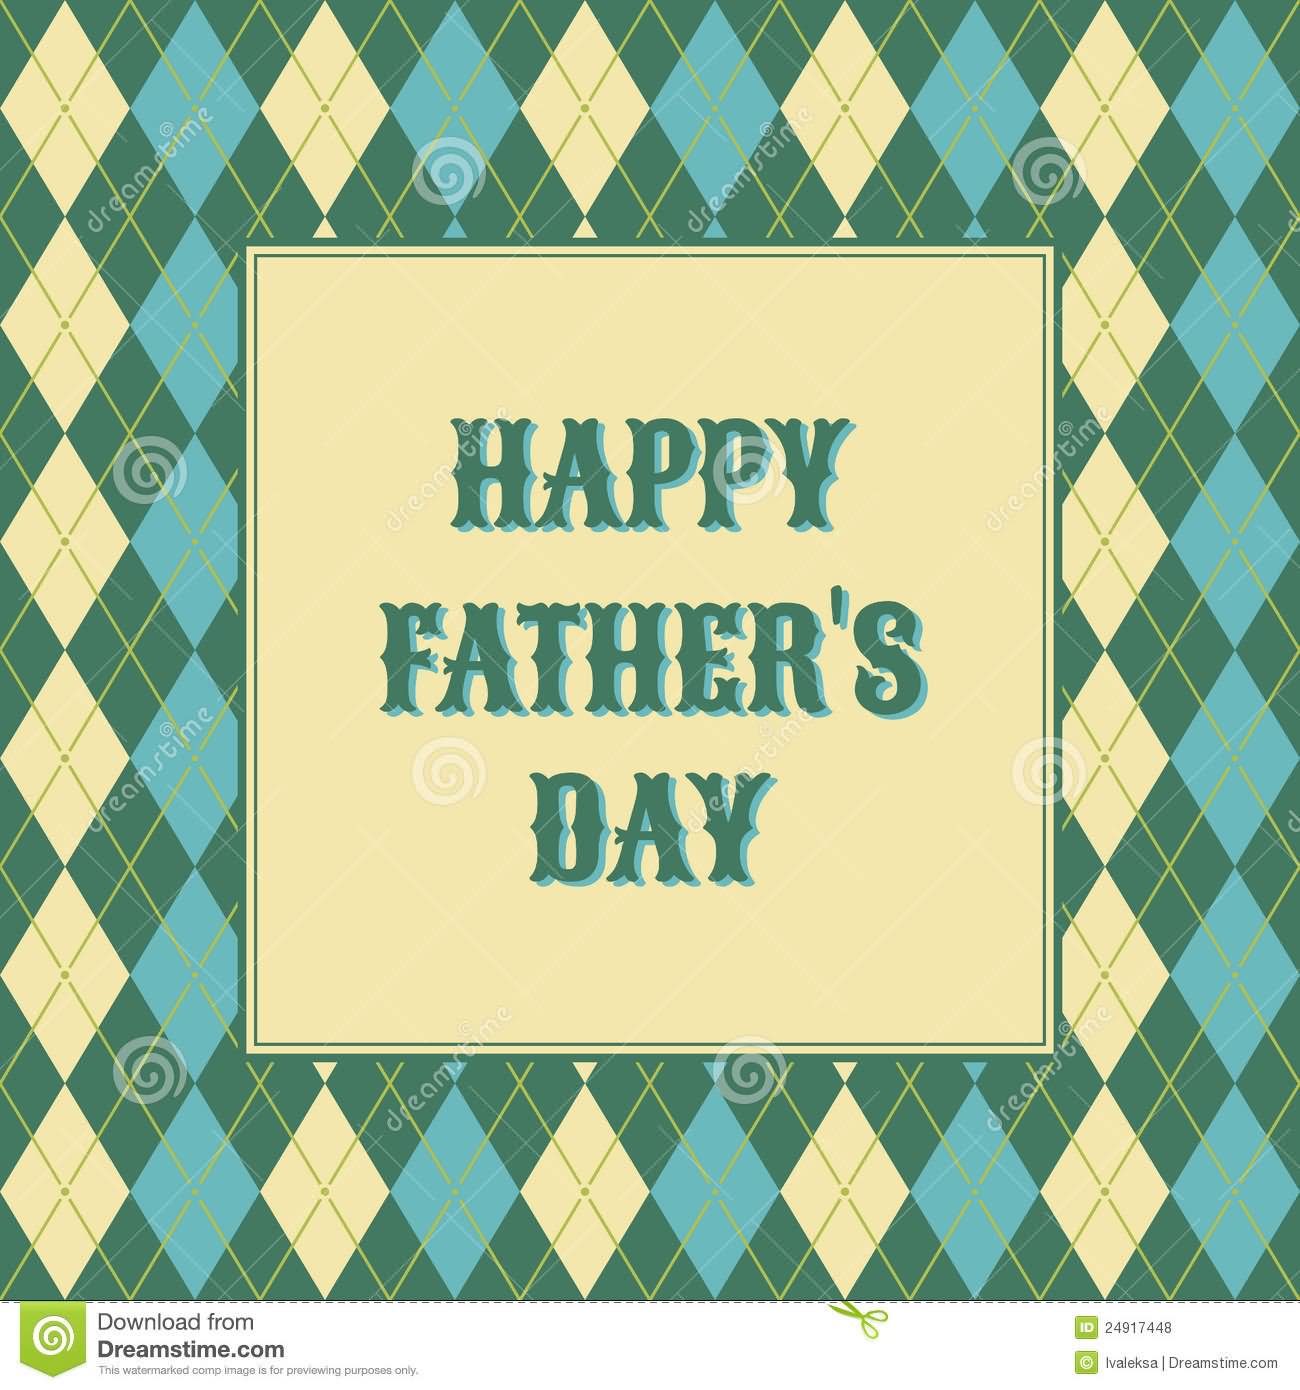 Happy Father's Day Simple Greeting Card